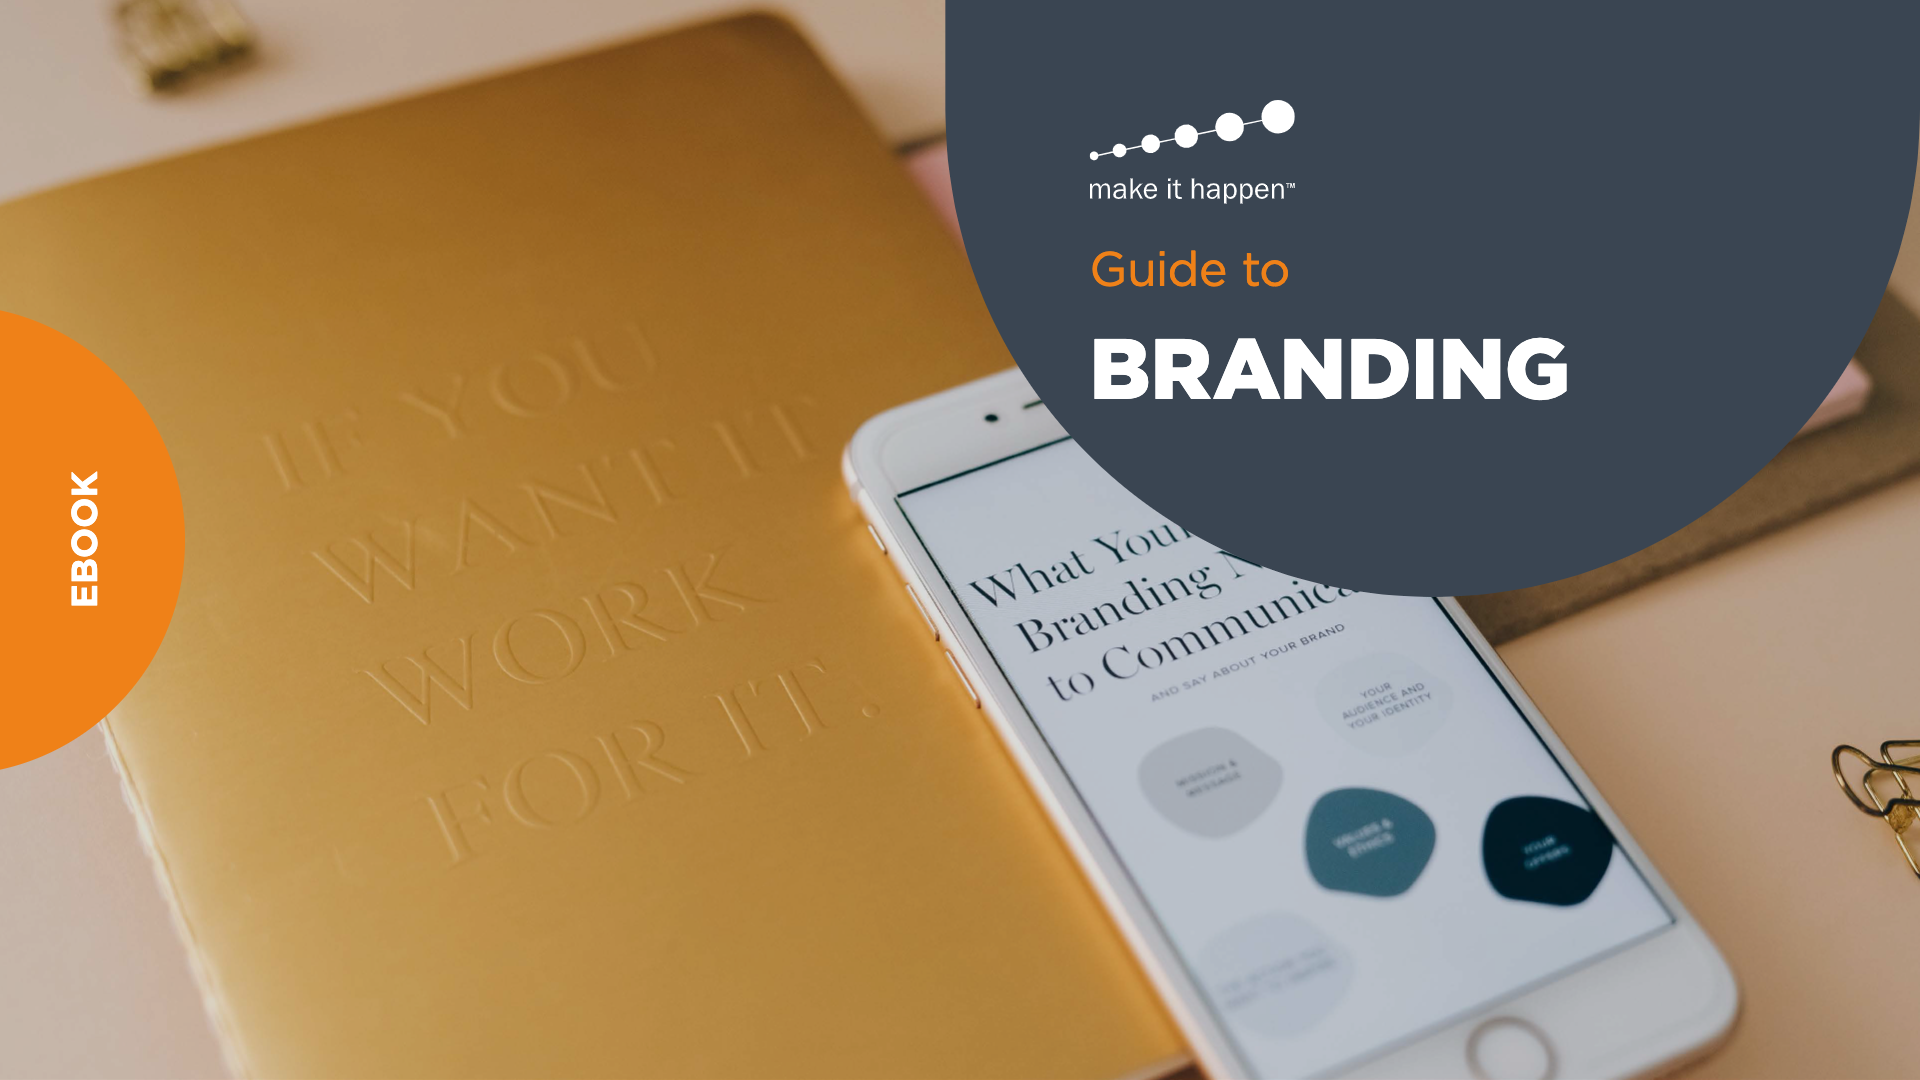 Guide to Branding